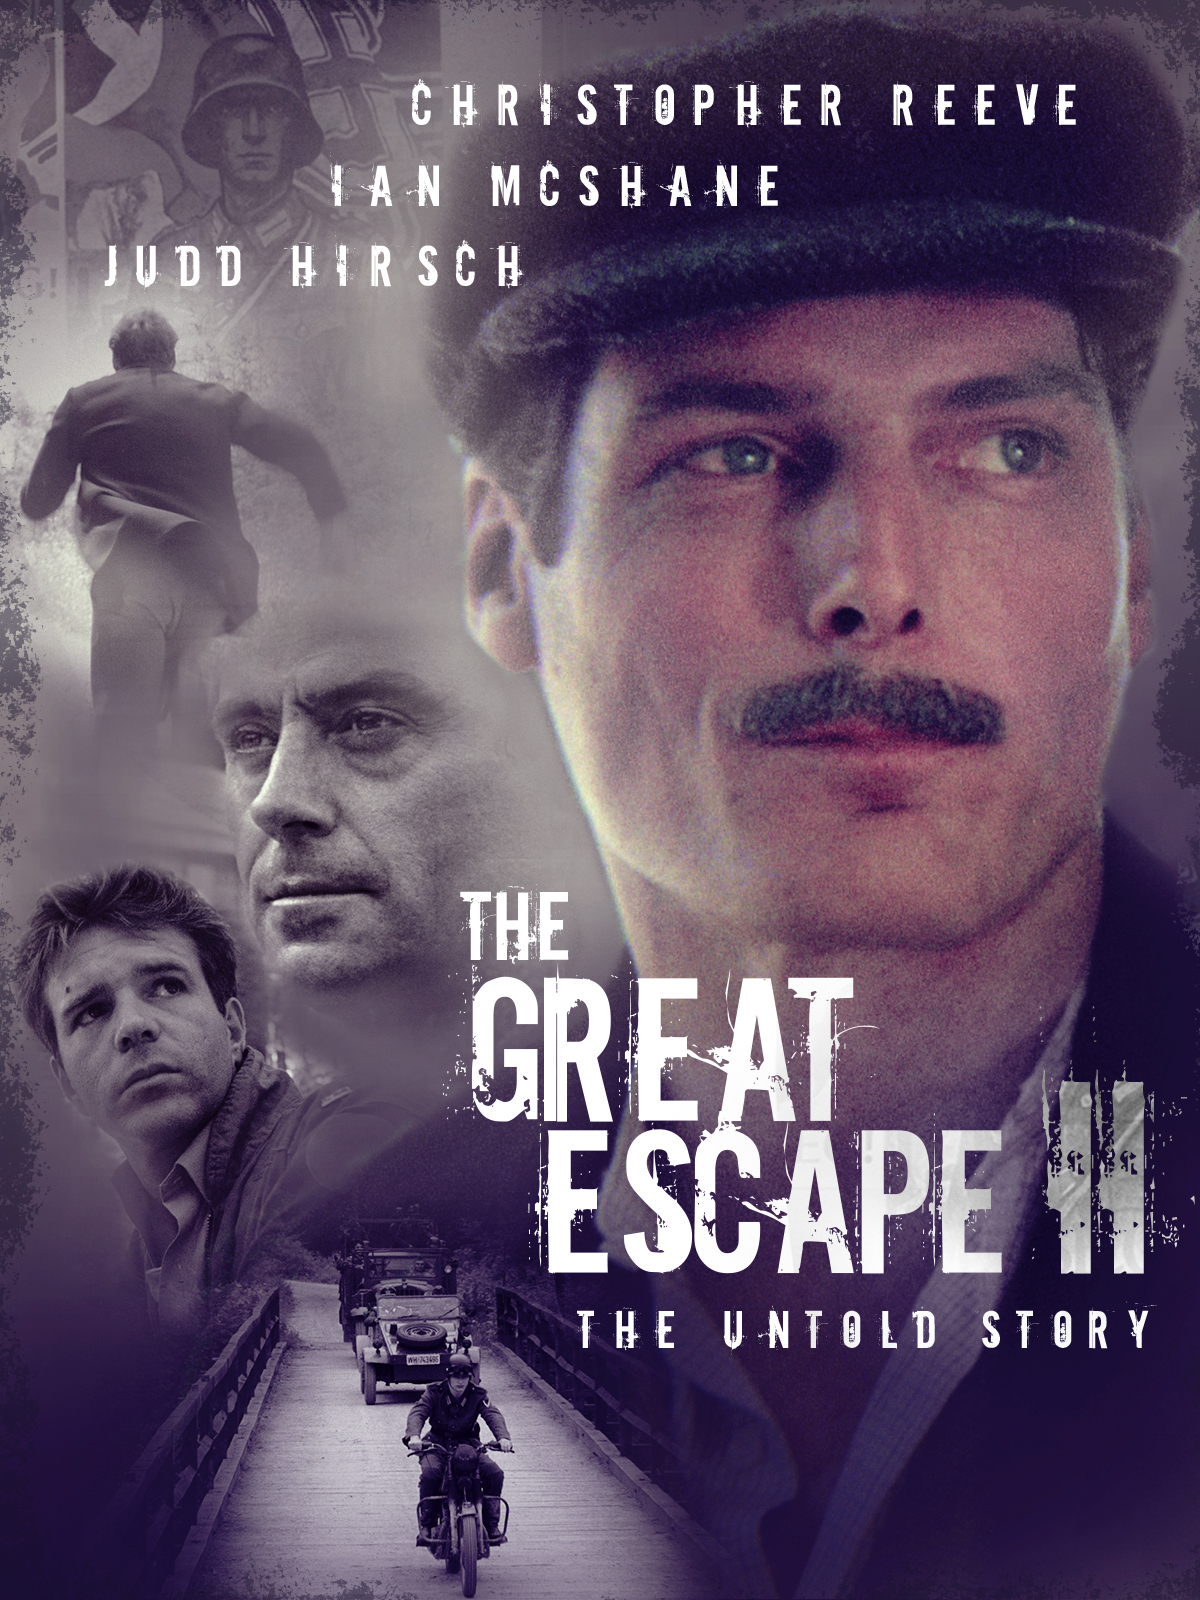 The Great Escape II: The Untold Story (1988) Screenshot 4